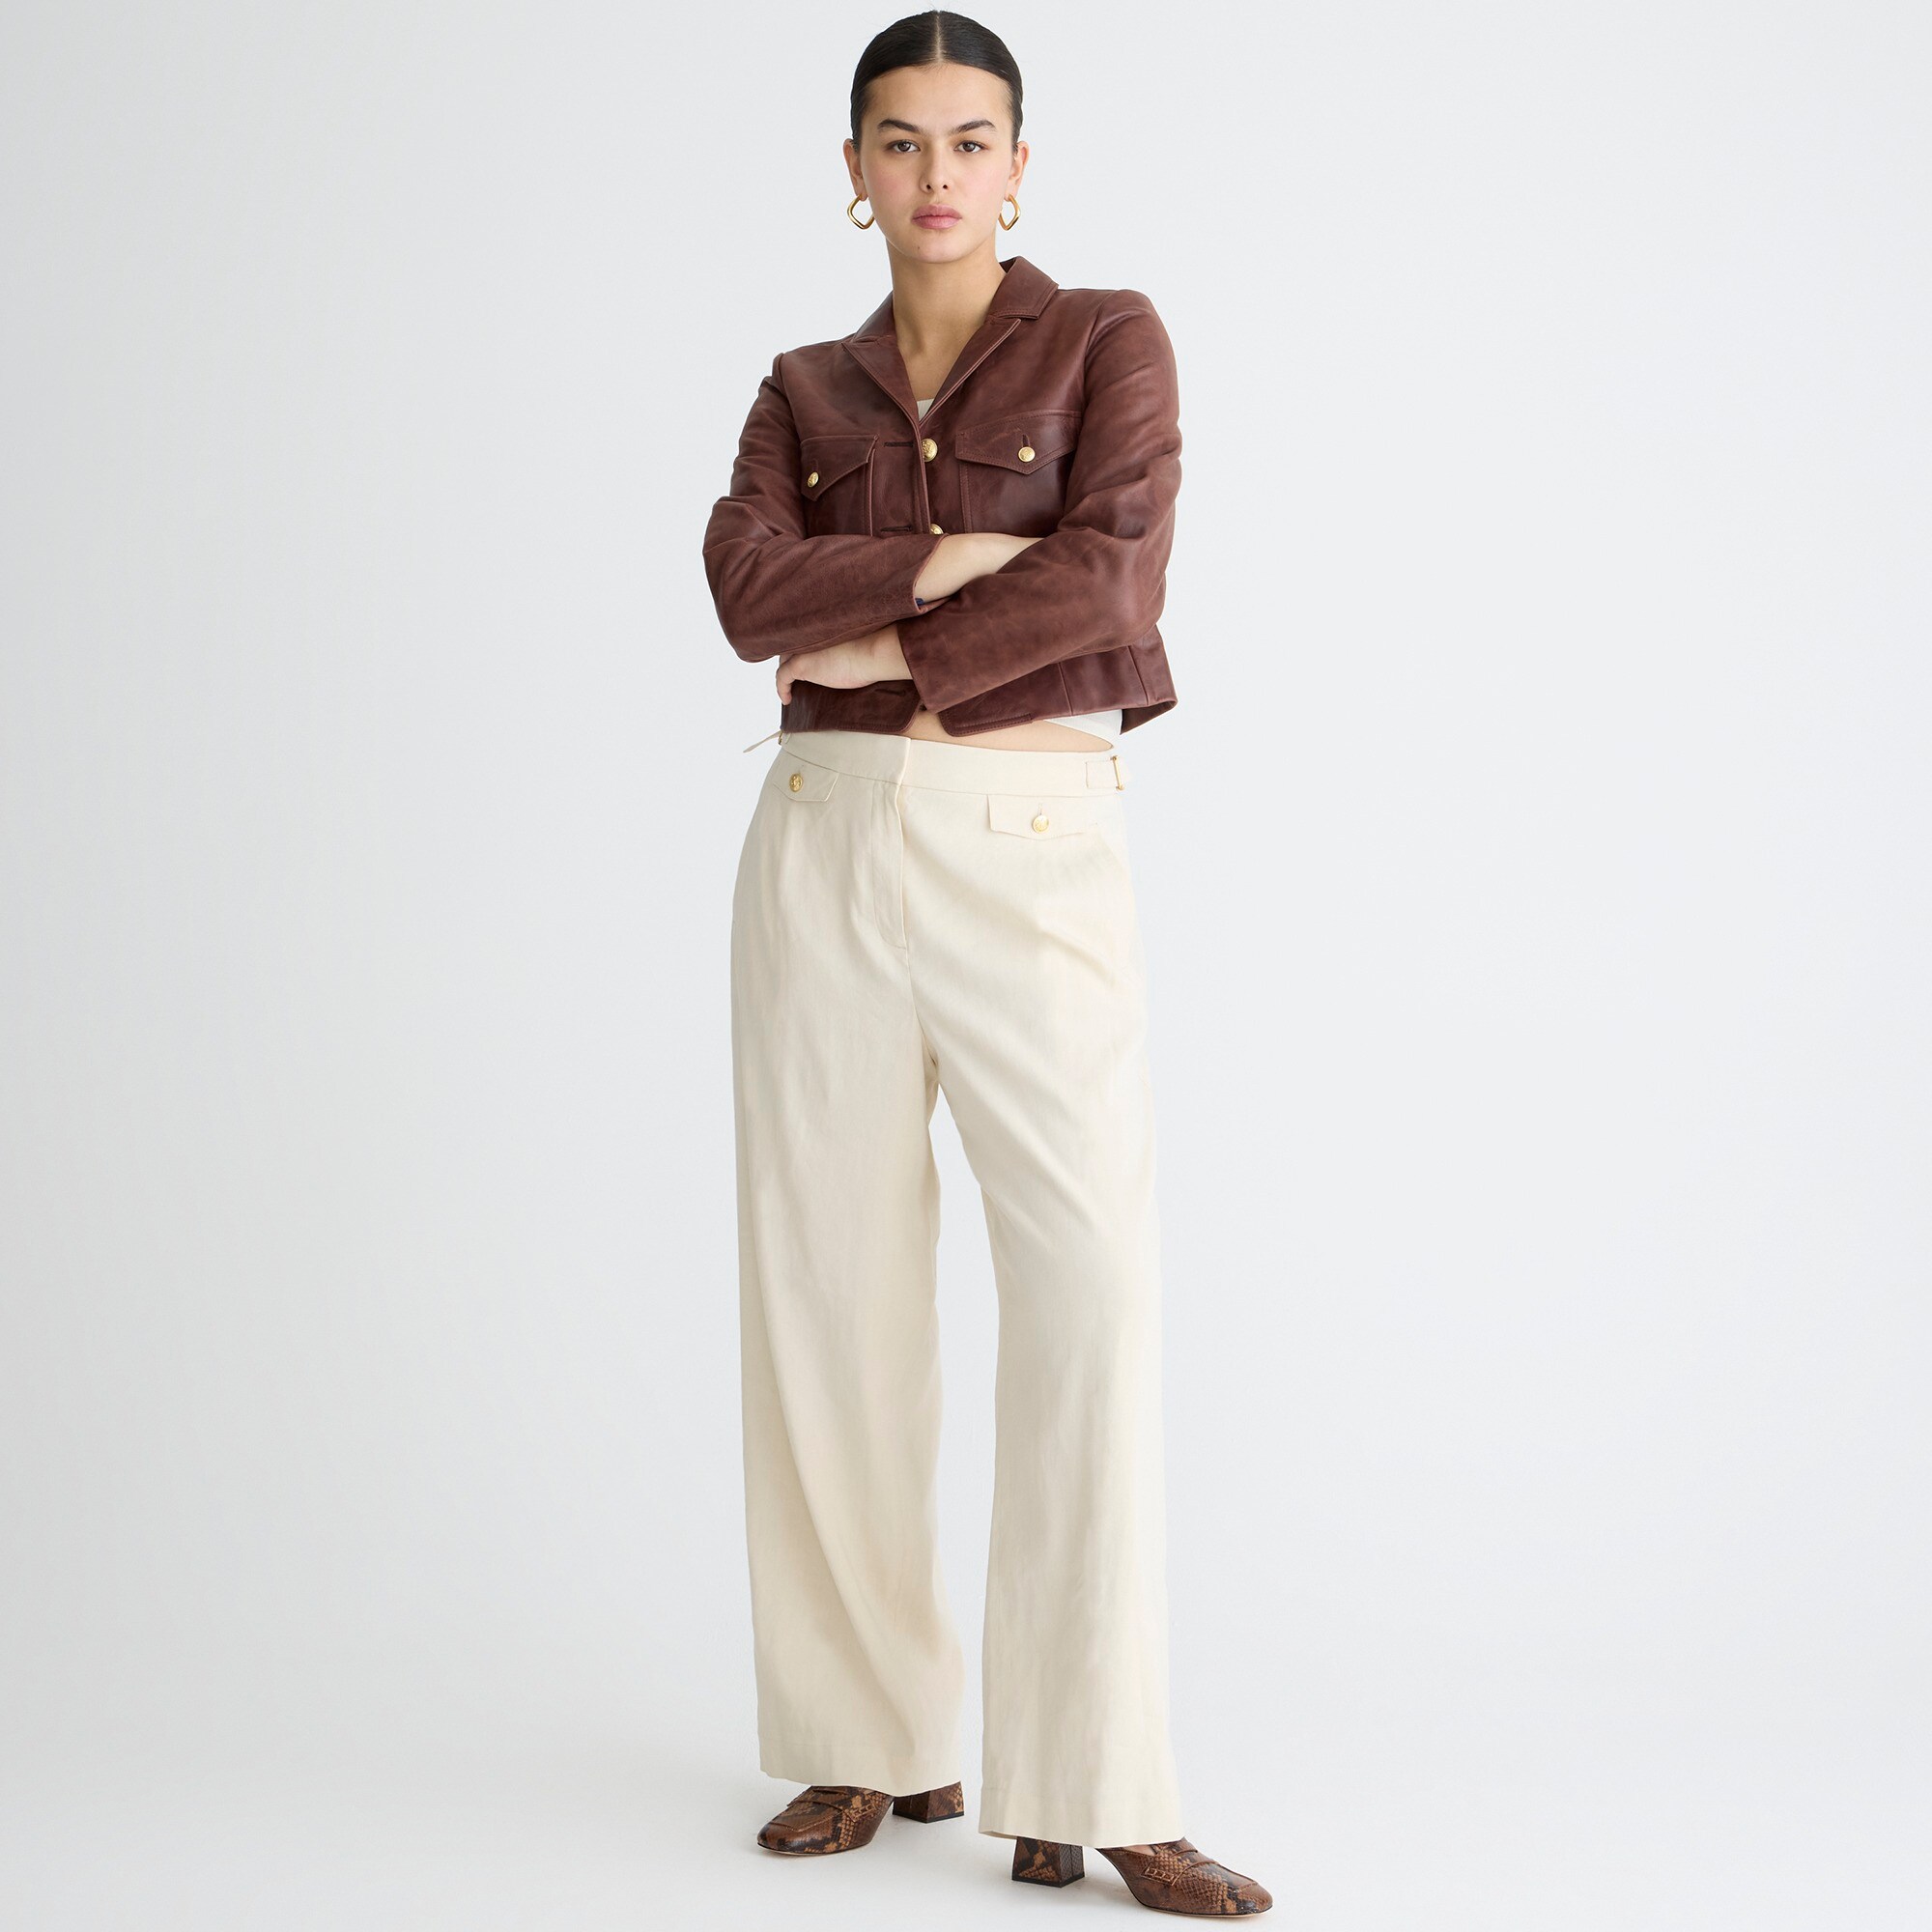  Tall Collection side-tab trouser in Italian linen blend